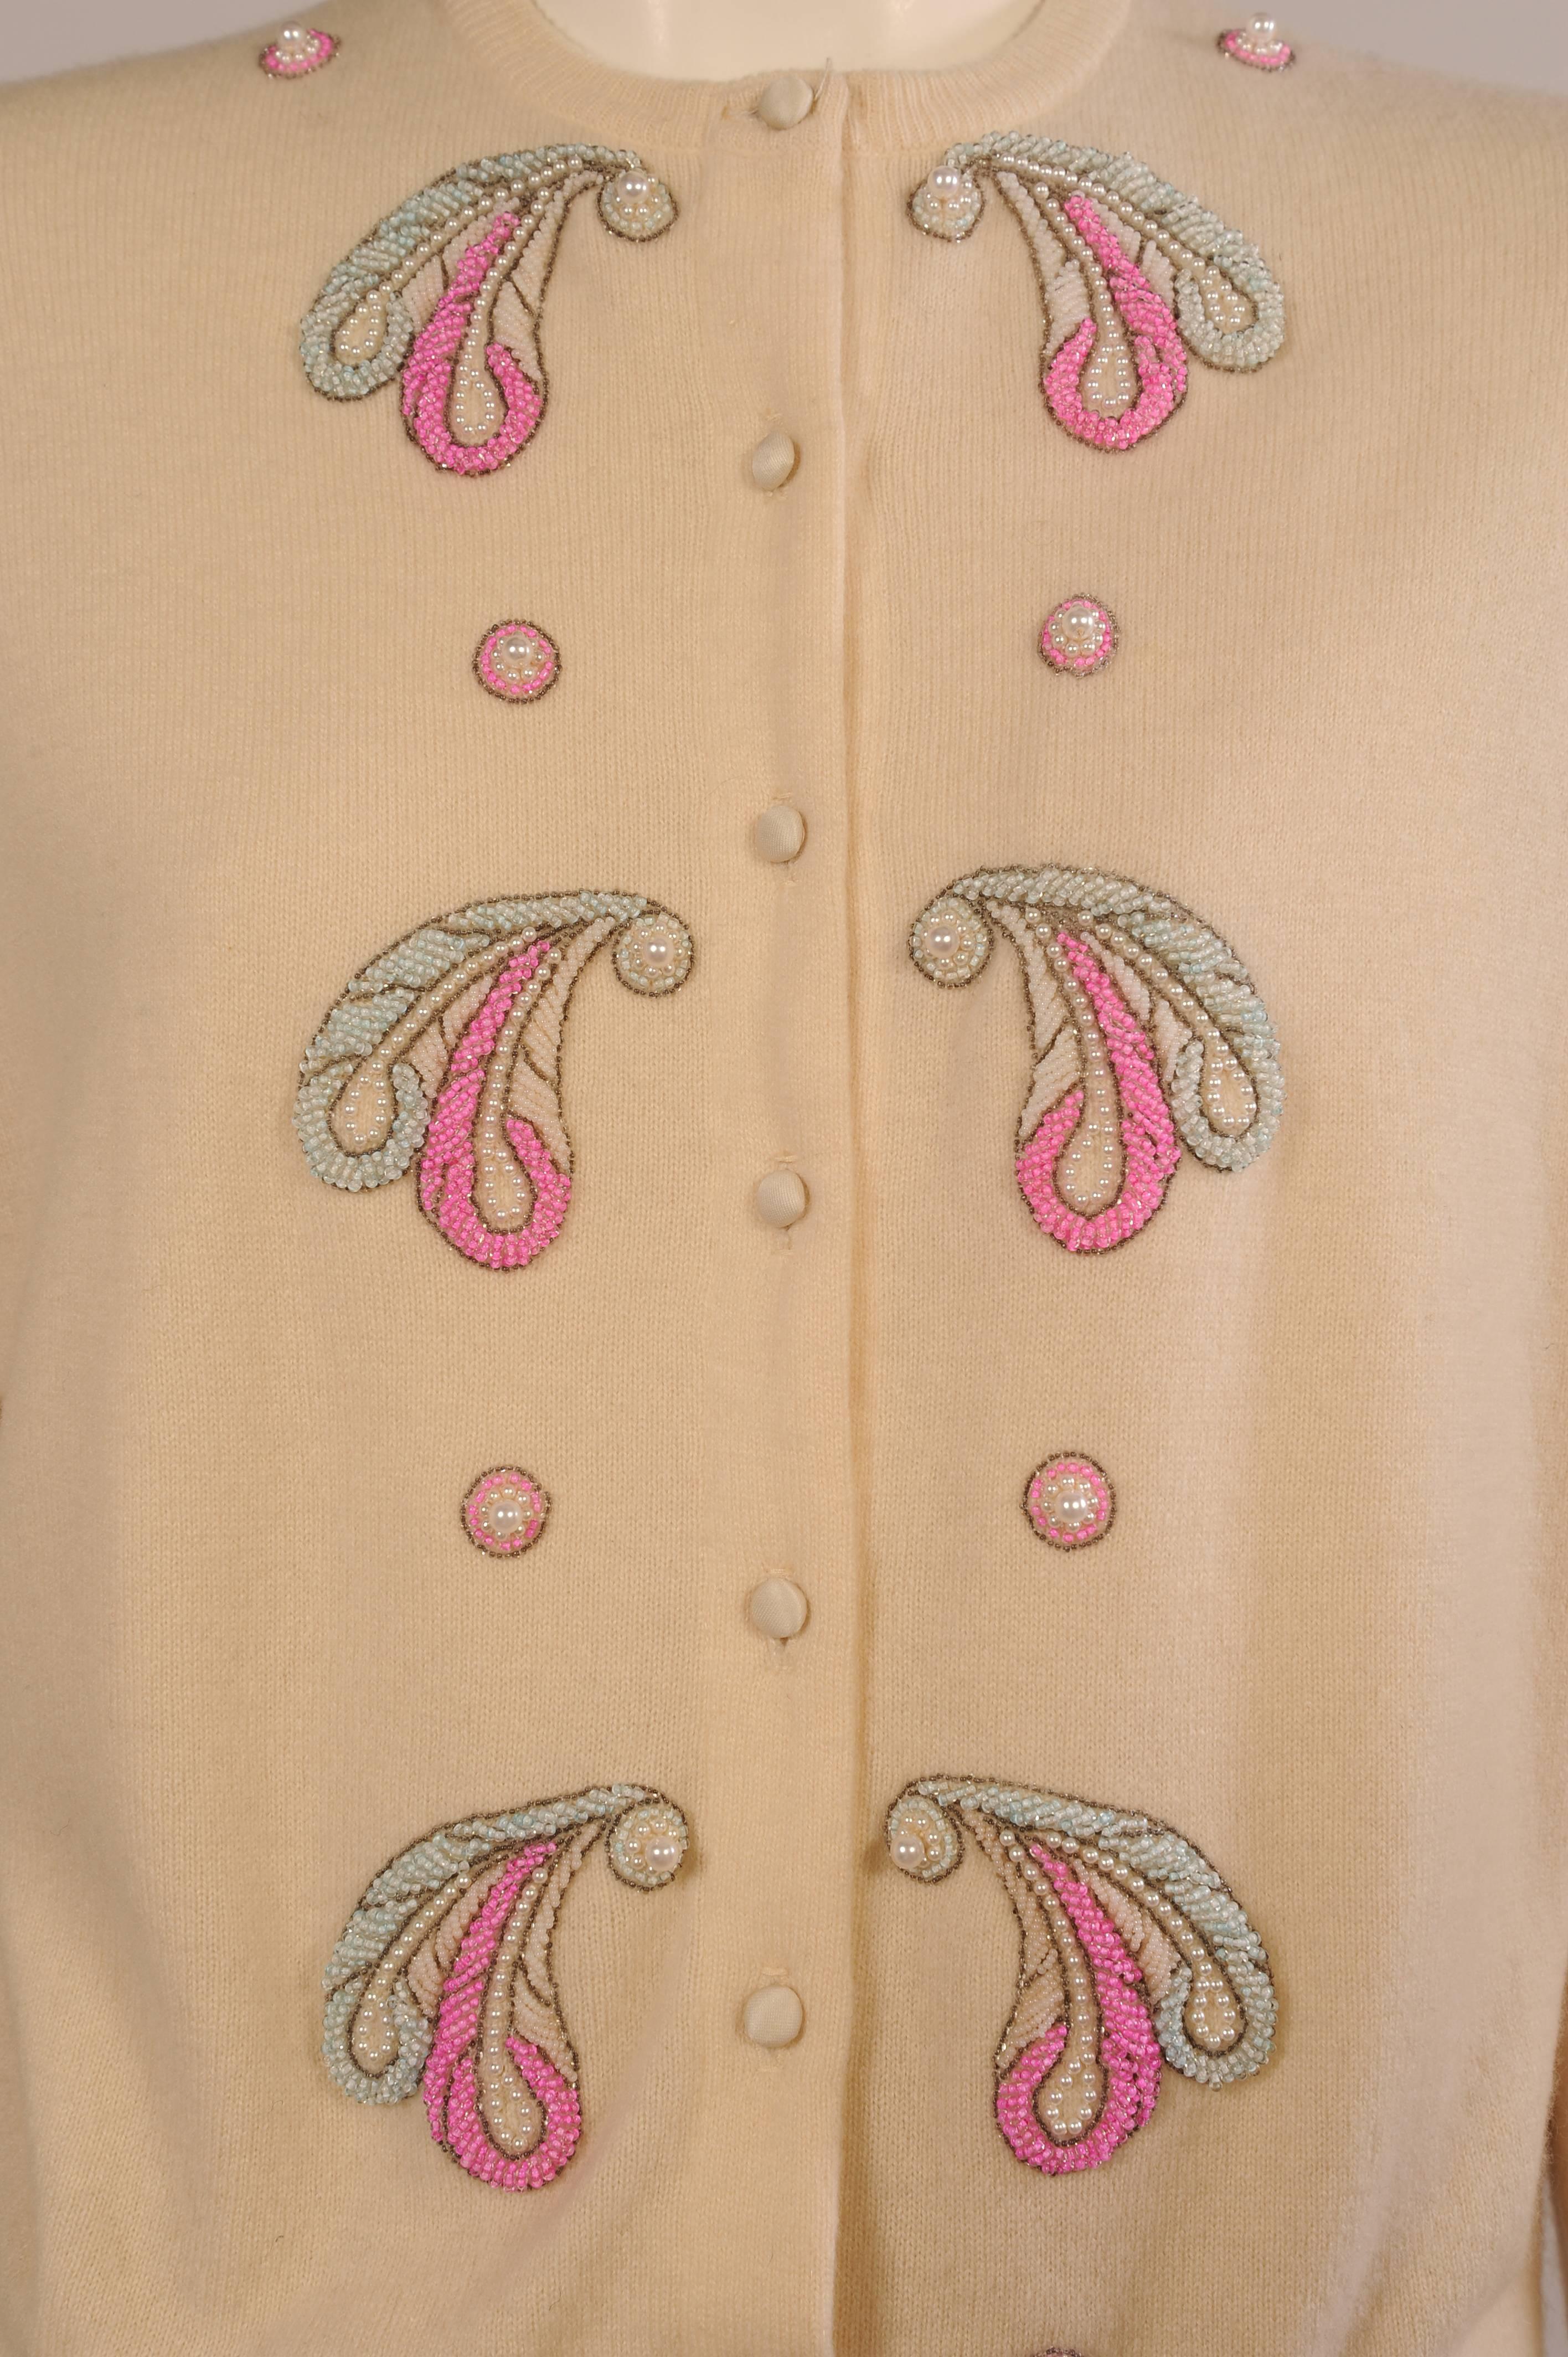 Inspired by Helen Bond Carruthers Malouf Designs, makers of fine lingerie also created beautiful embellished cashmere sweaters. This cream cashmere sweater has been altered for a more stylish fit. Satin buttons have been added as well as lush silk